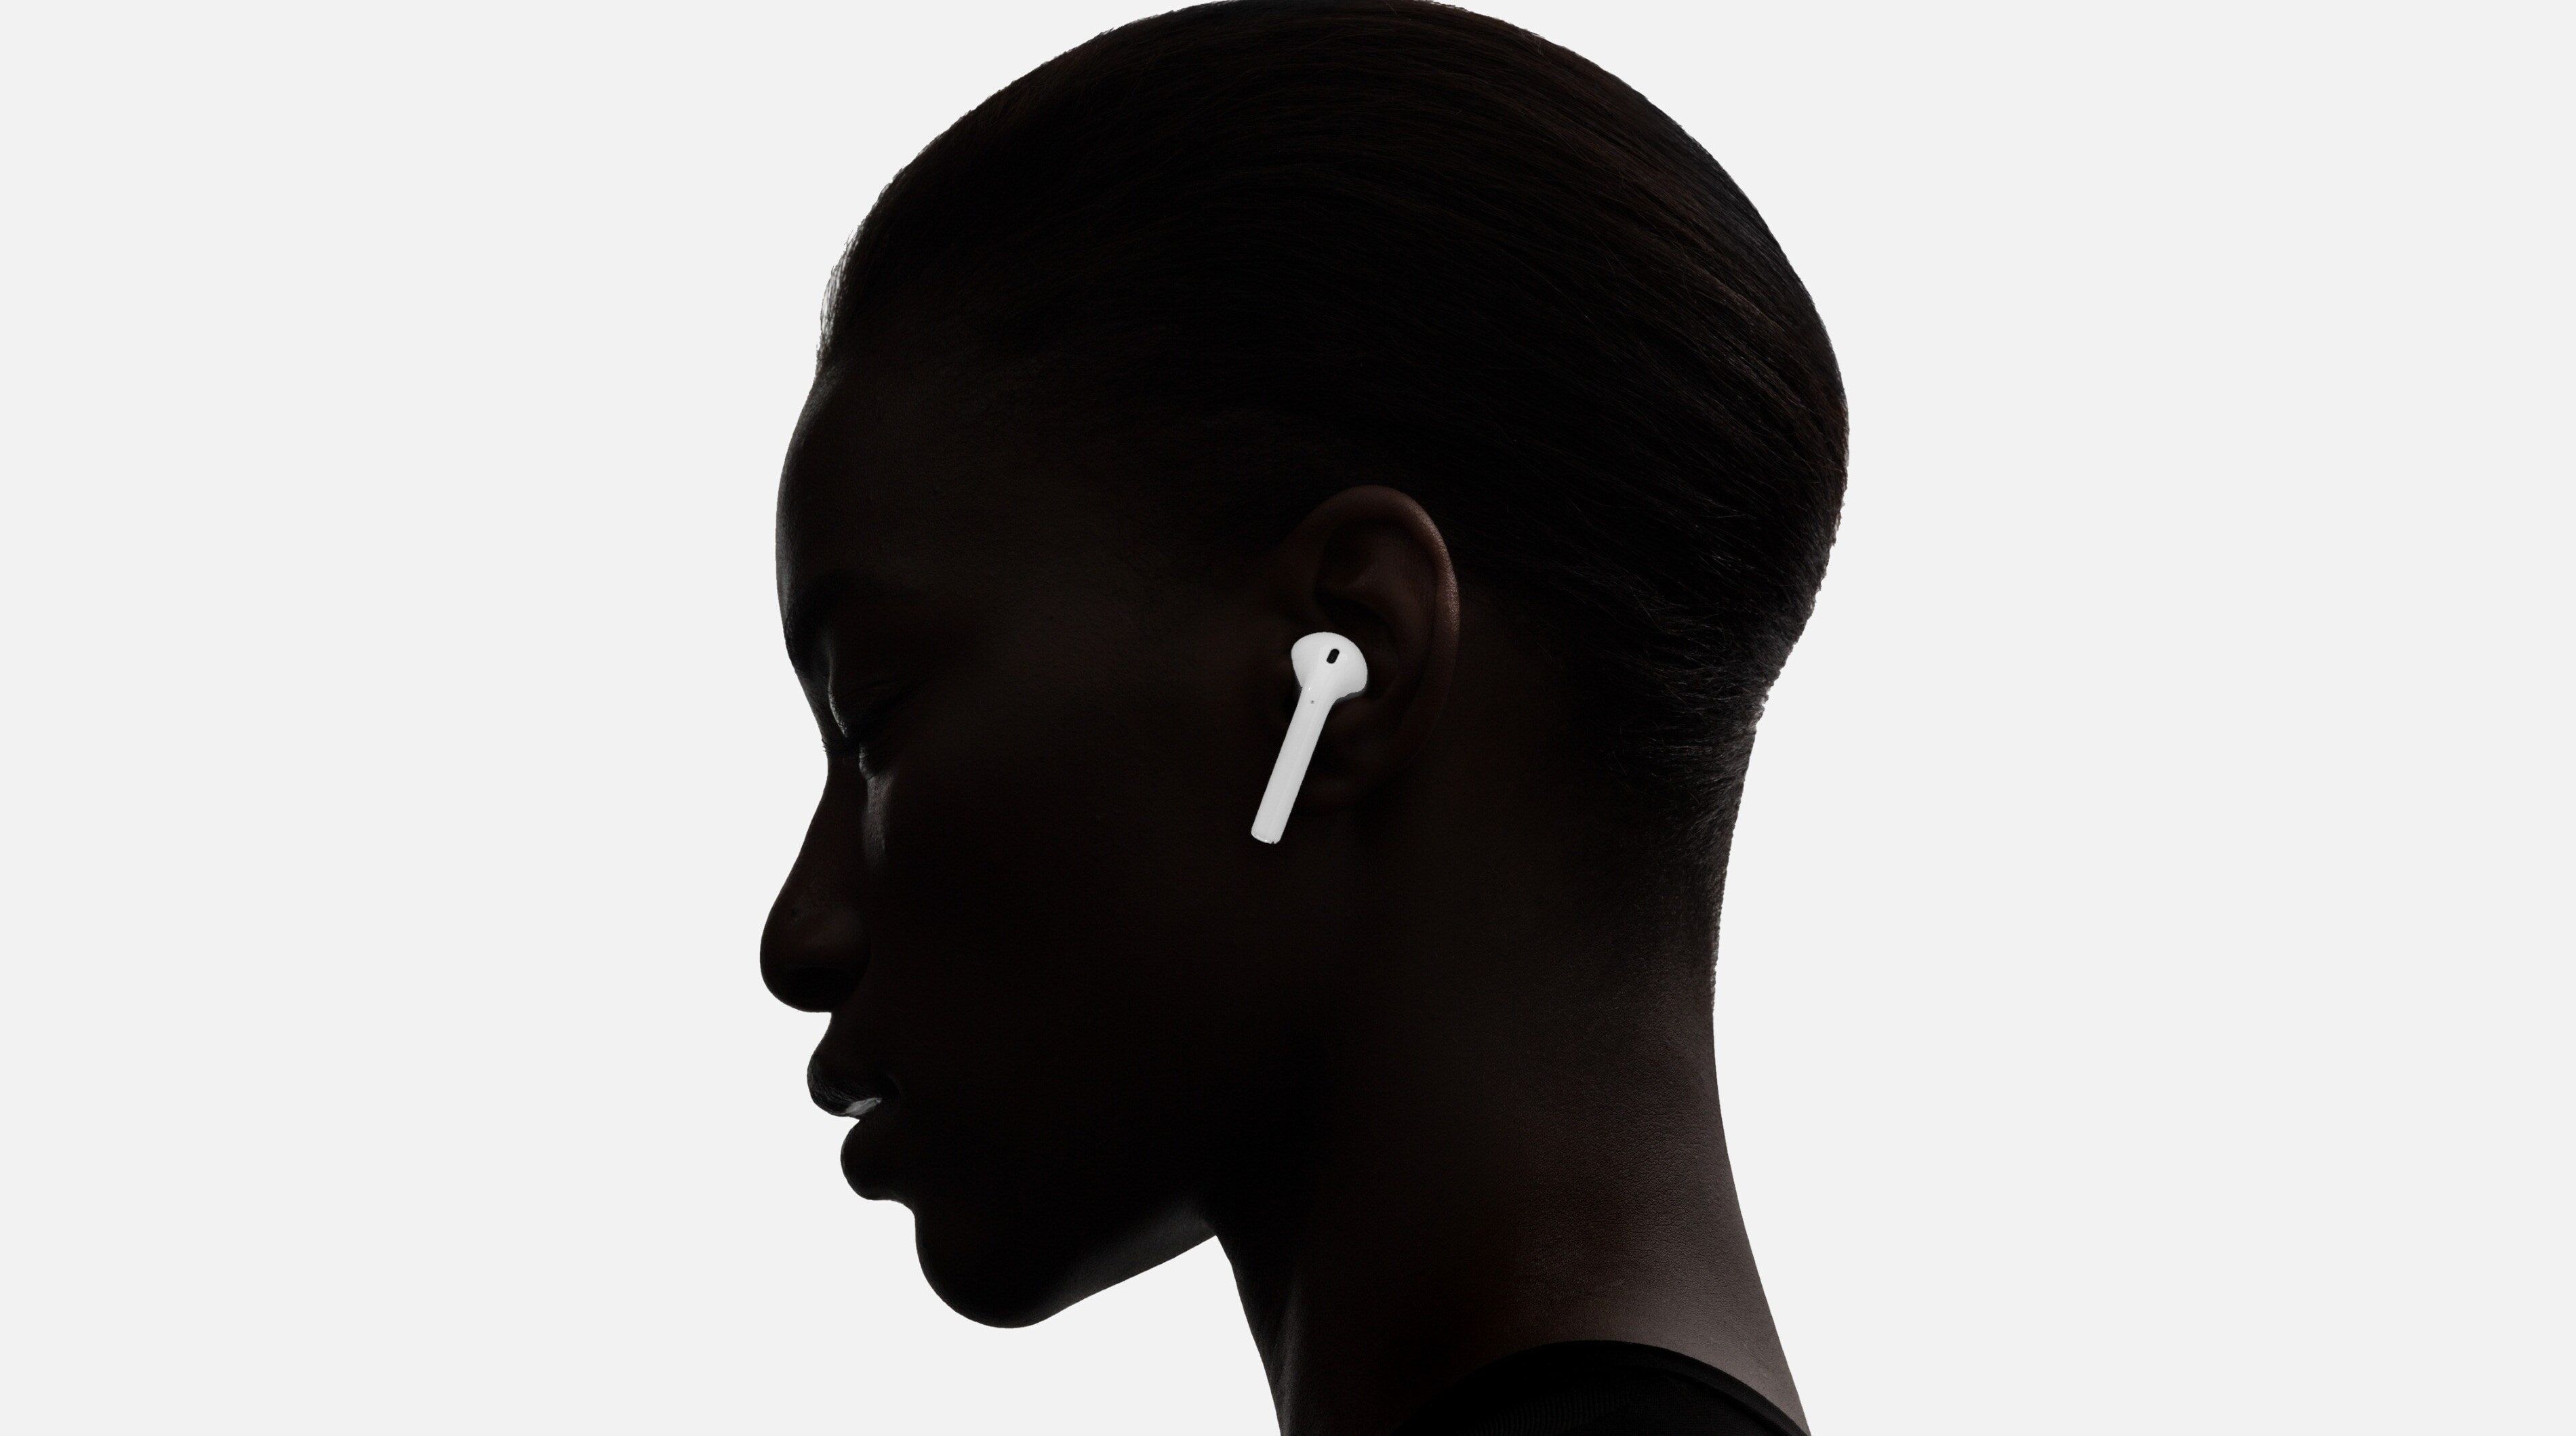 Airpods HD wallpaper free download